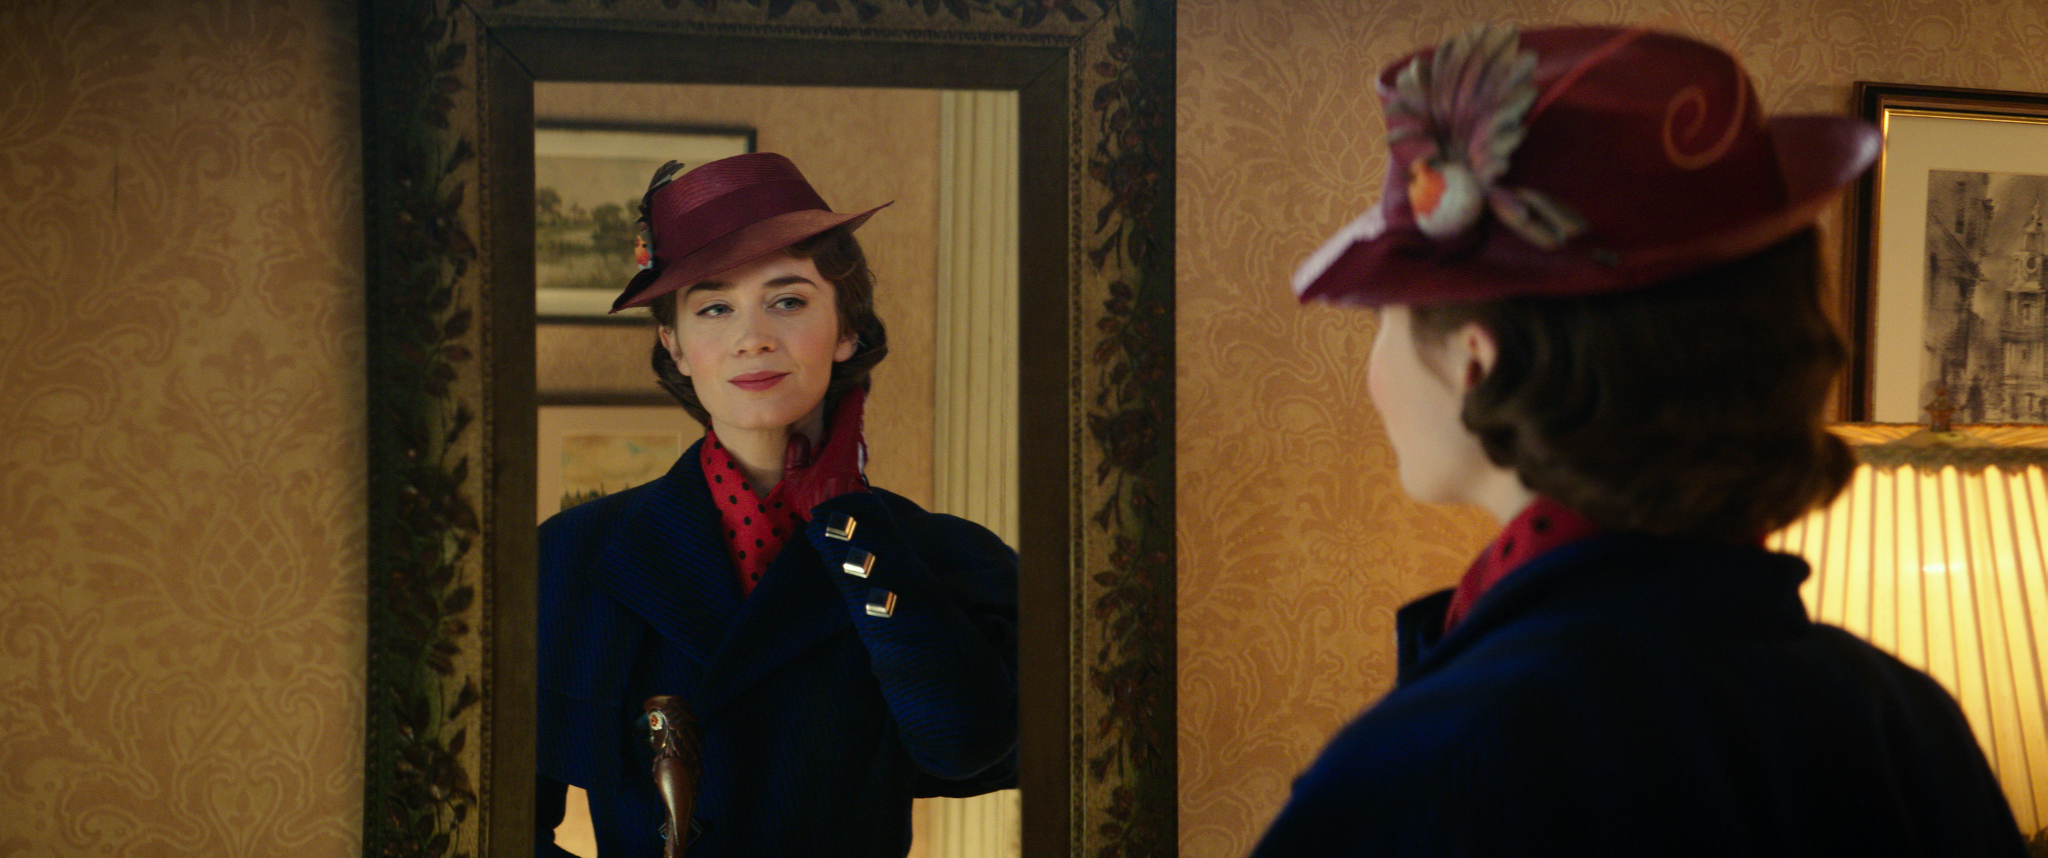 Get Ready For Mary Poppins Returns with these New Character Posters and an Exclusive Sneak Peek from Disney